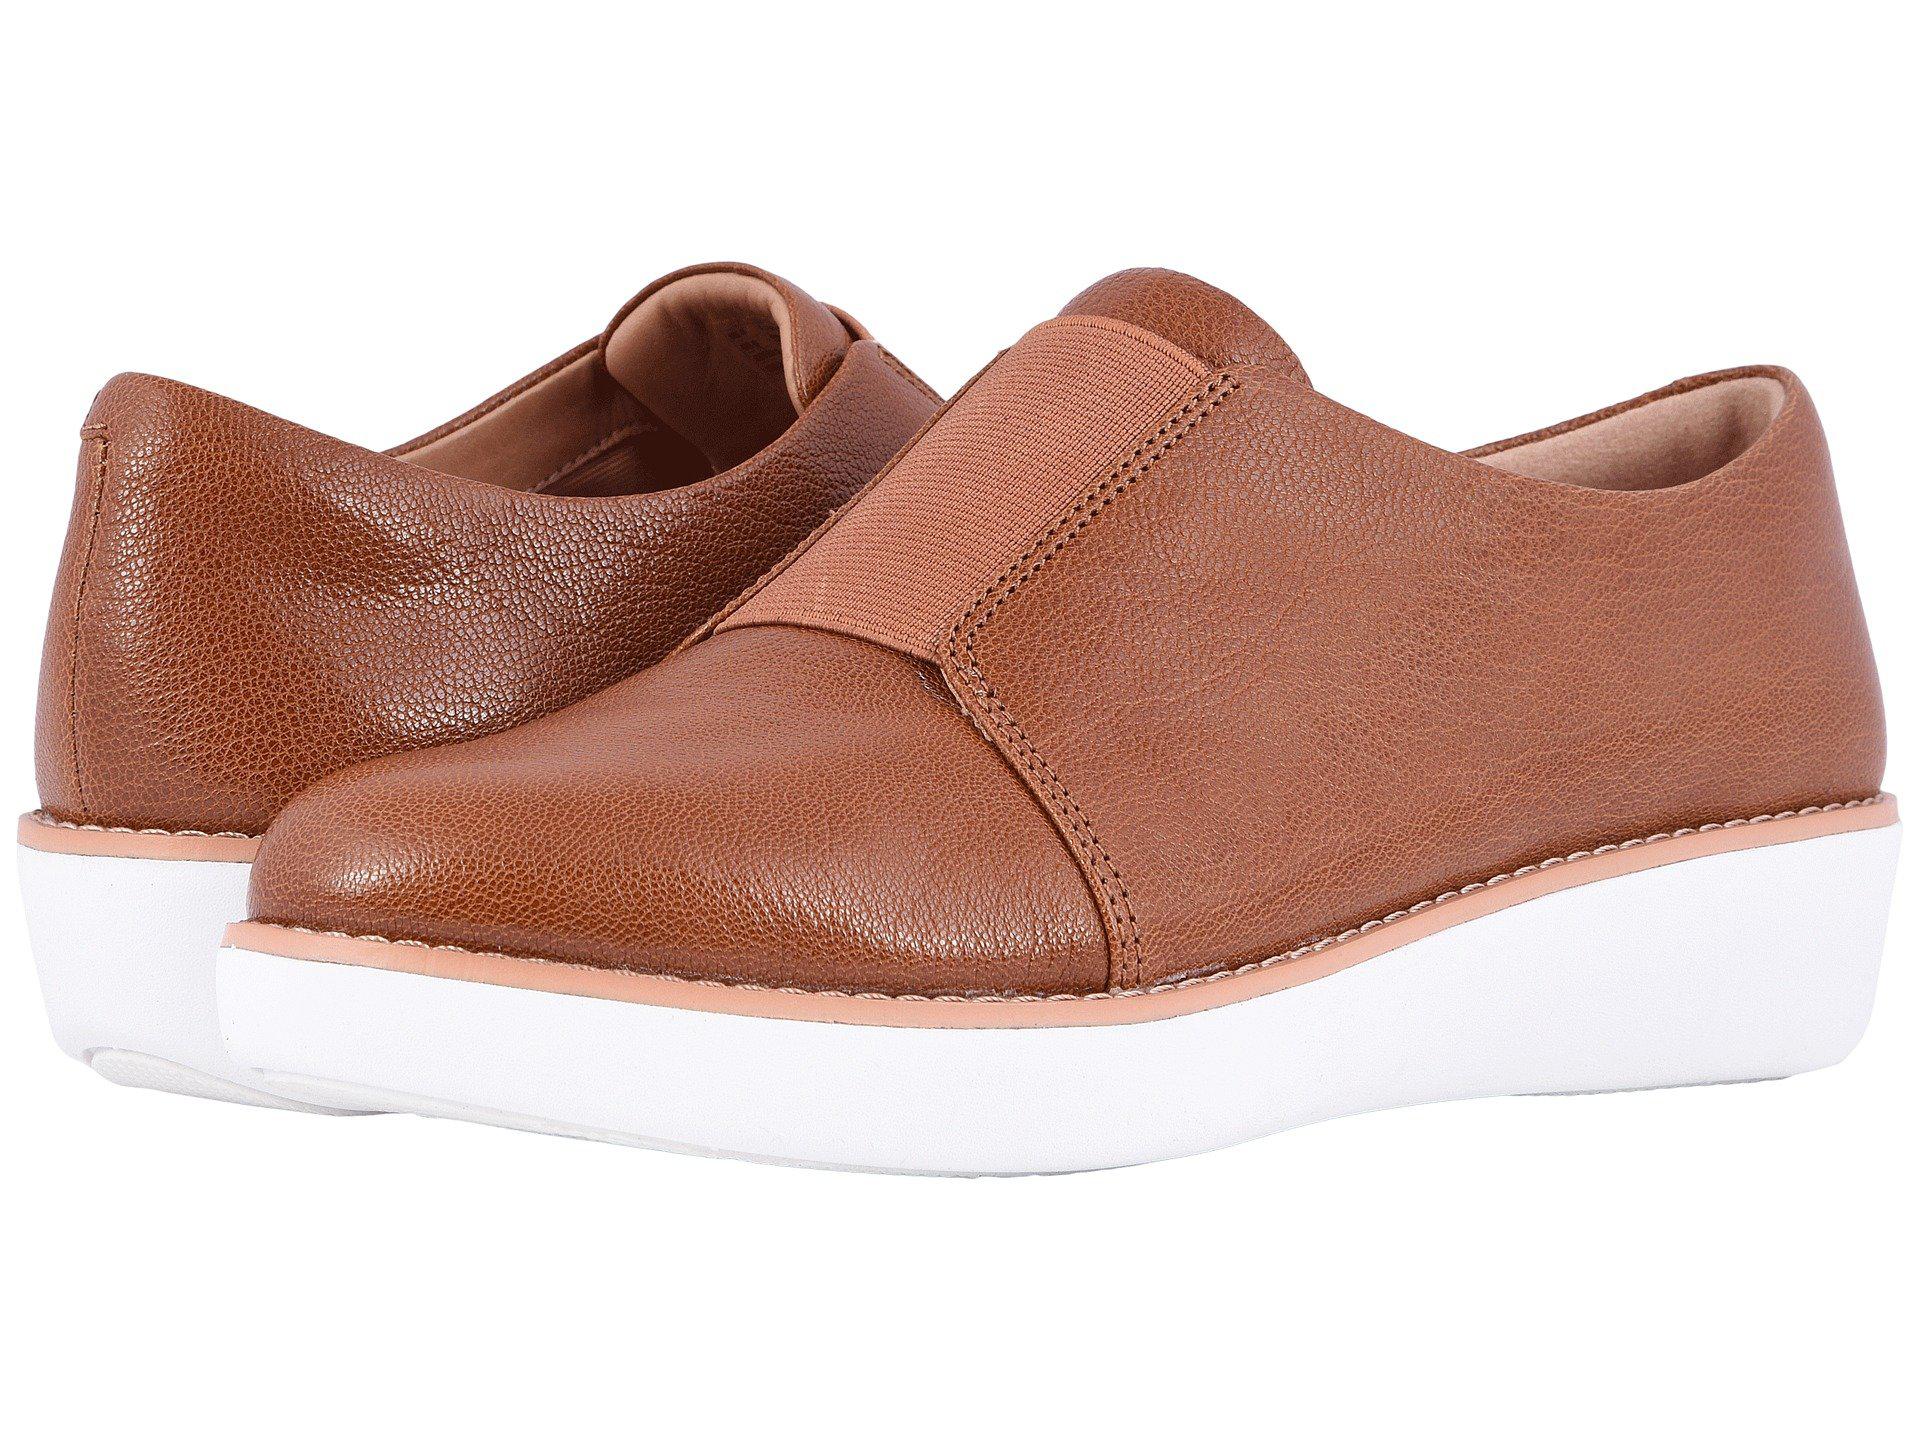 fitflop laceless leather derby shoes